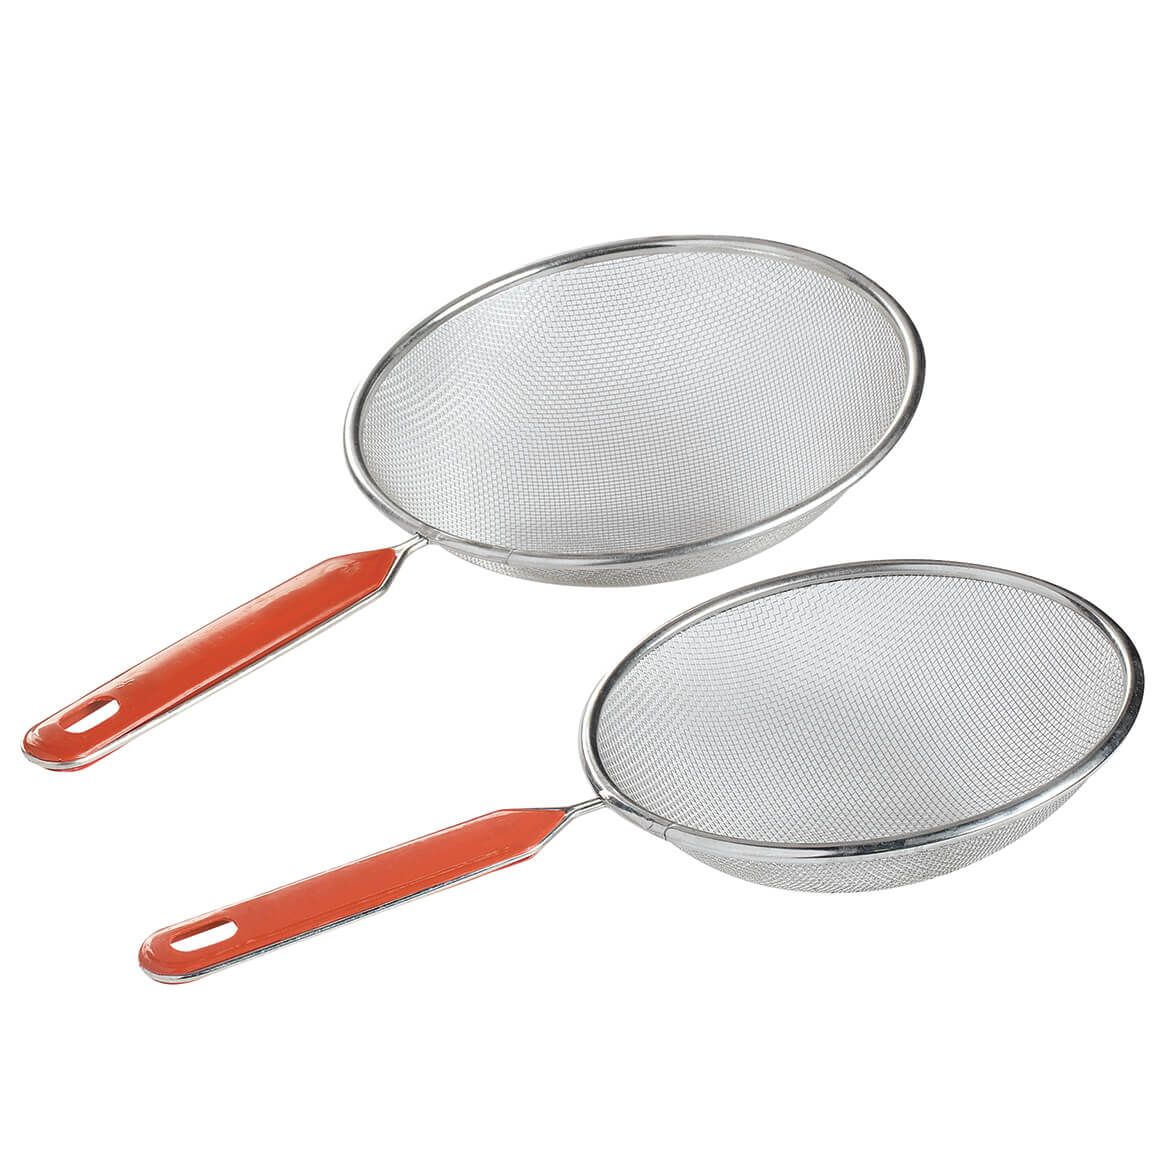 Metal Strainers with Handles, Set of 2 + '-' + 376879